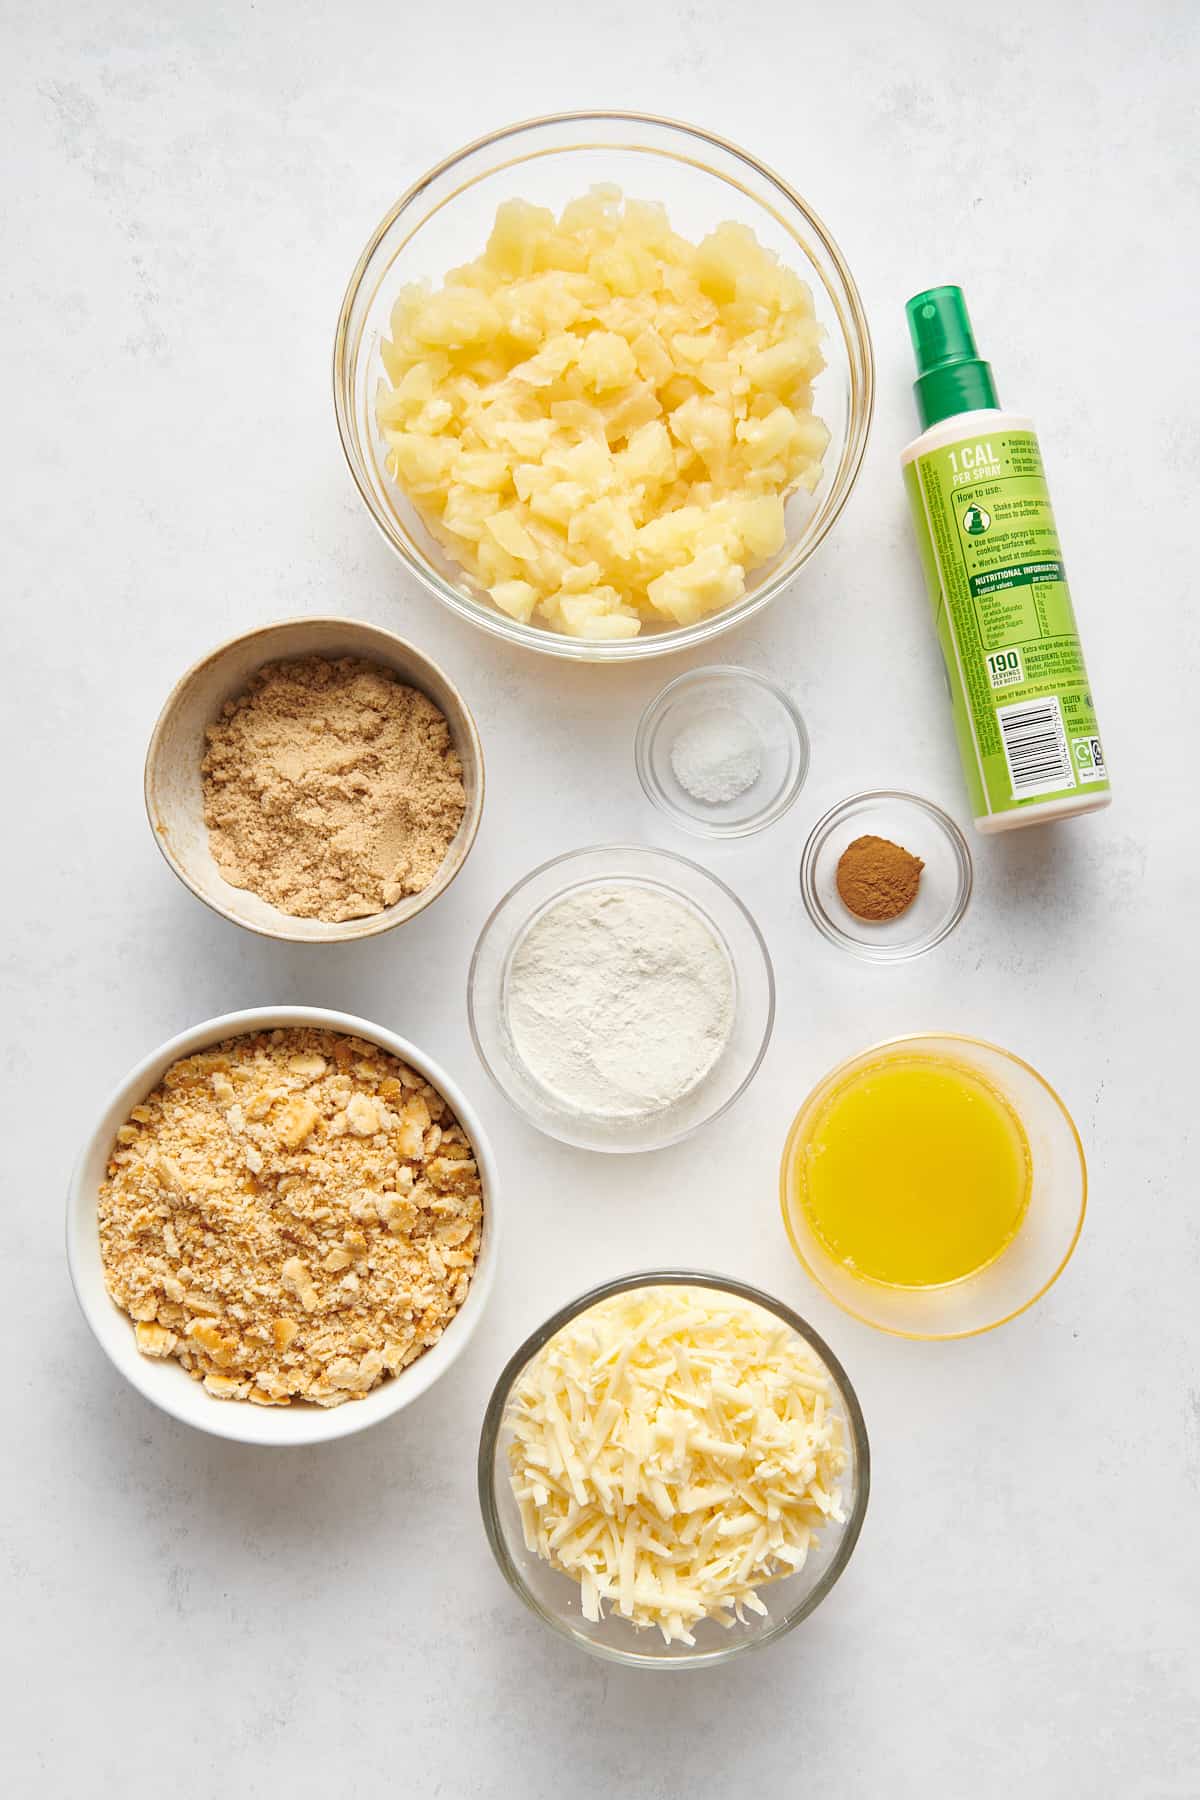 ingredients to make pineapple casserole